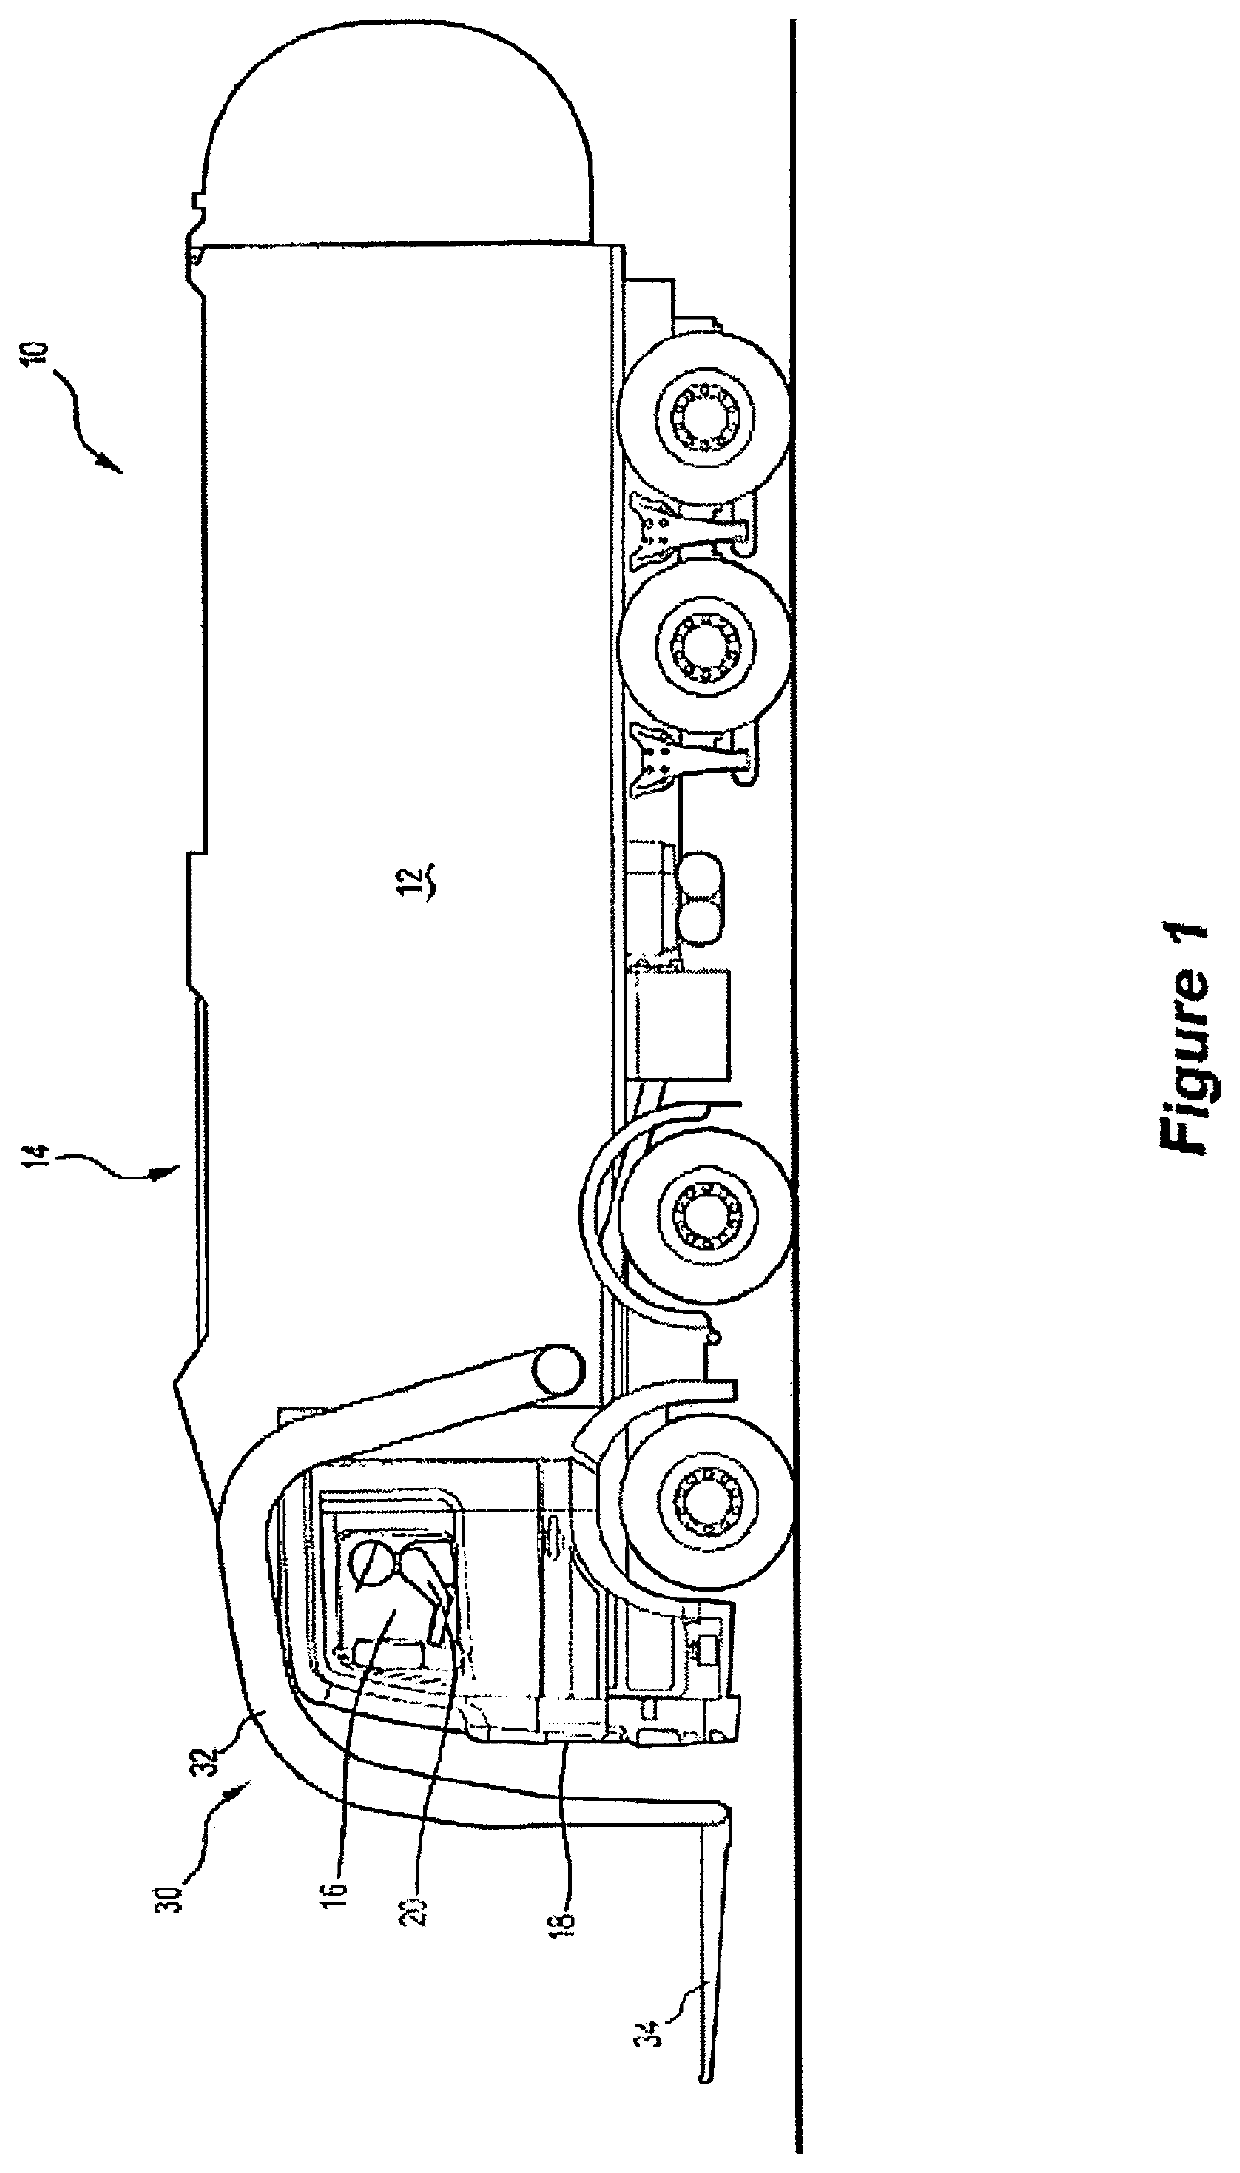 Refuse collection vehicle and system therefor